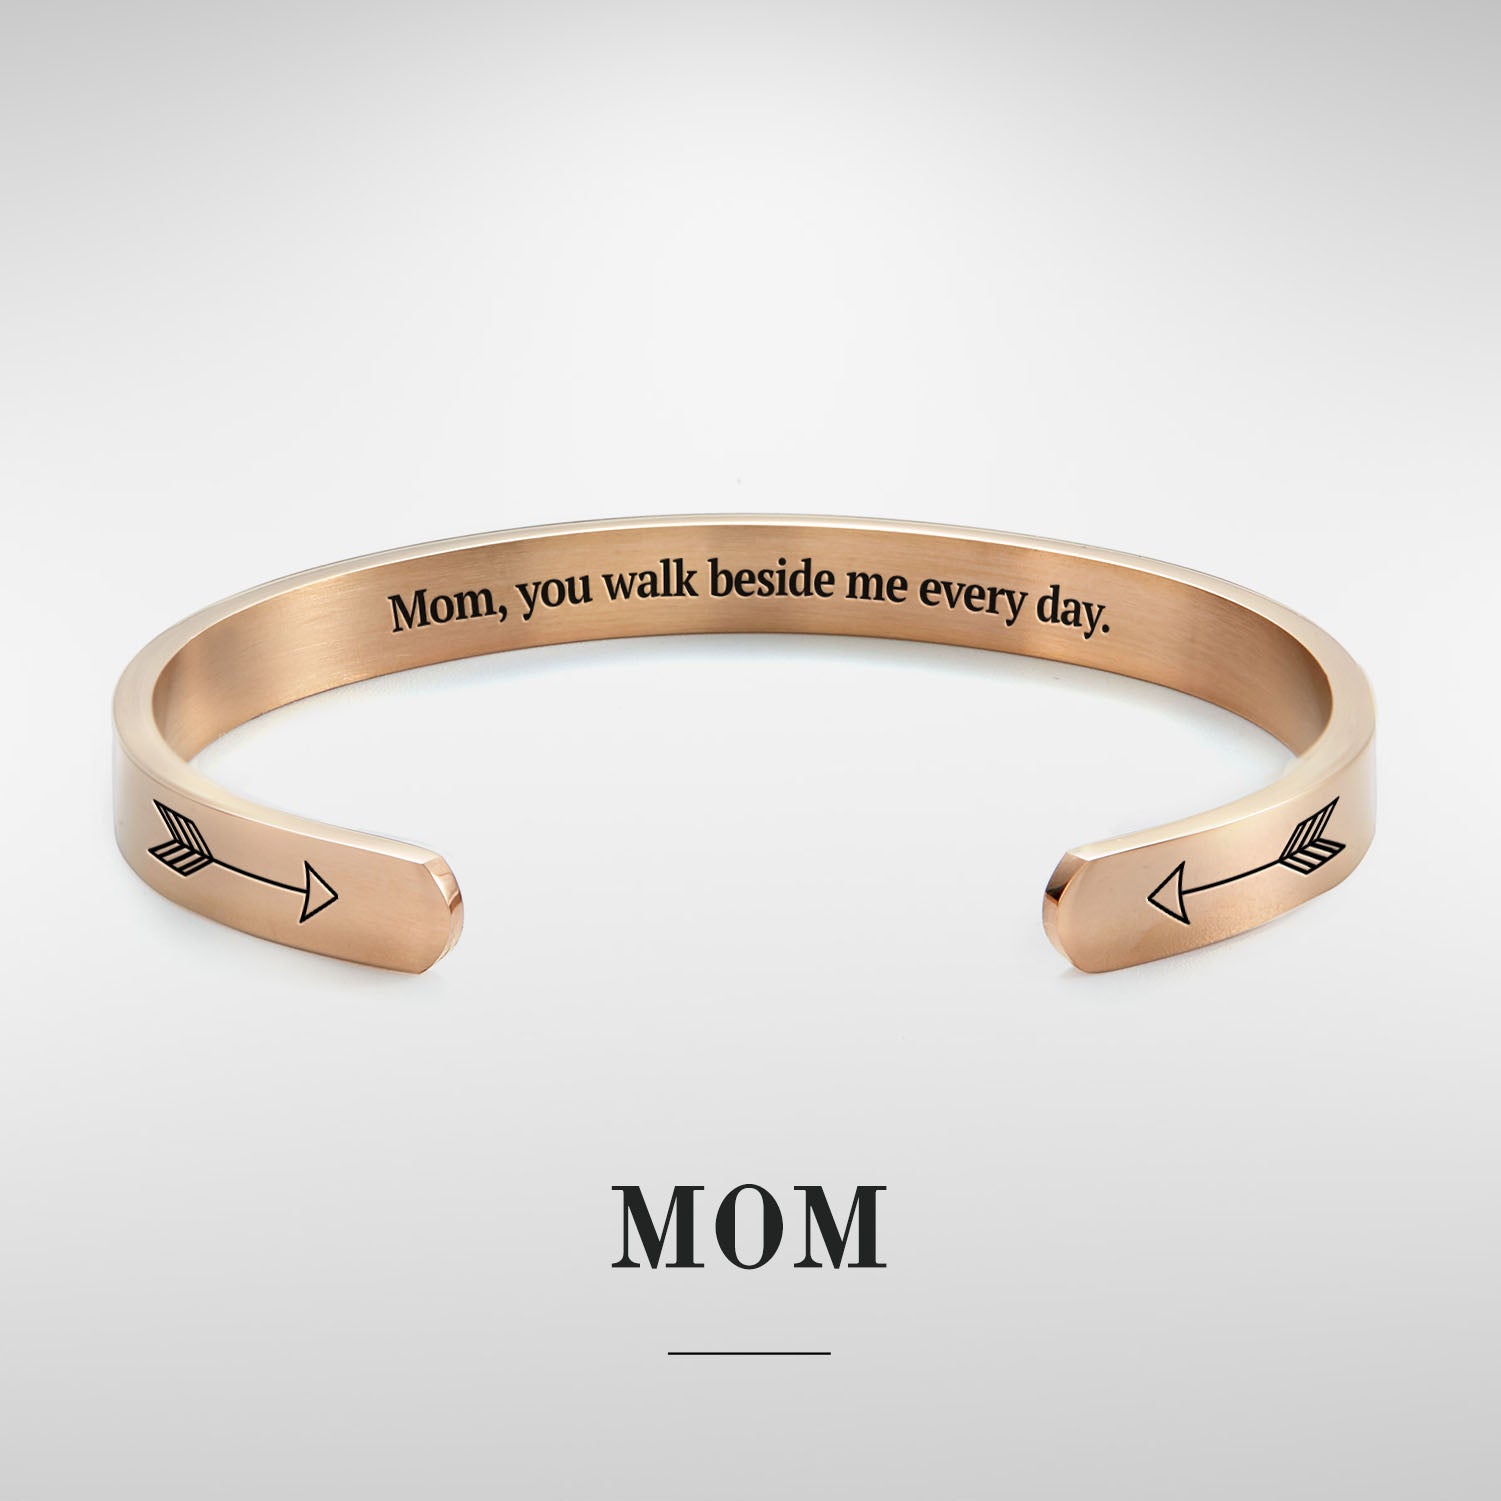 Mom, you walk beside me every day bracelet with rose gold plating